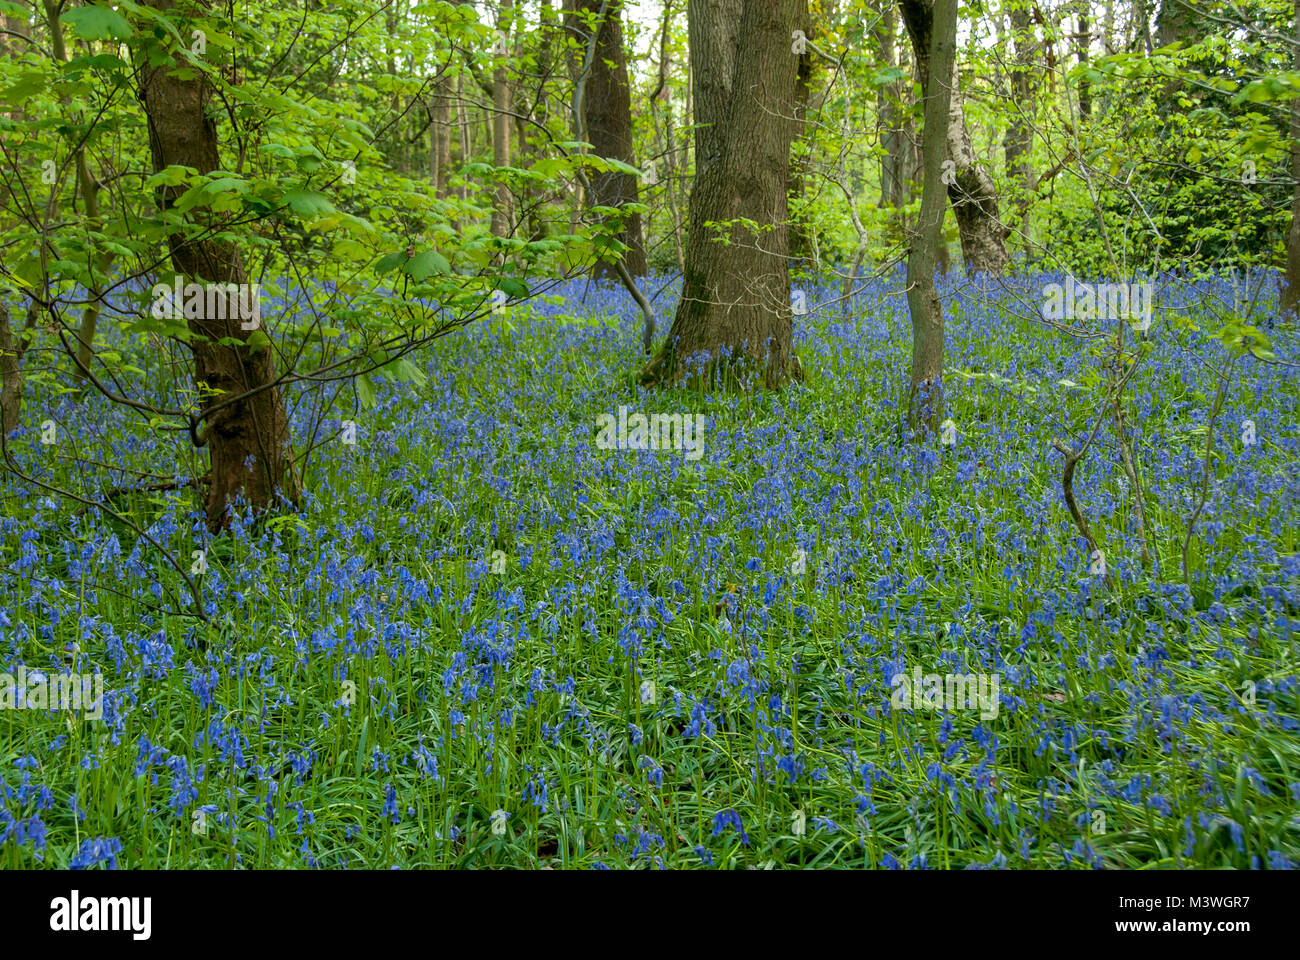 Bluebells carpet the forest floor of Carbrook Ravine nature reserve in the spring, Sheffield Wildlife Trust, UK Stock Photo